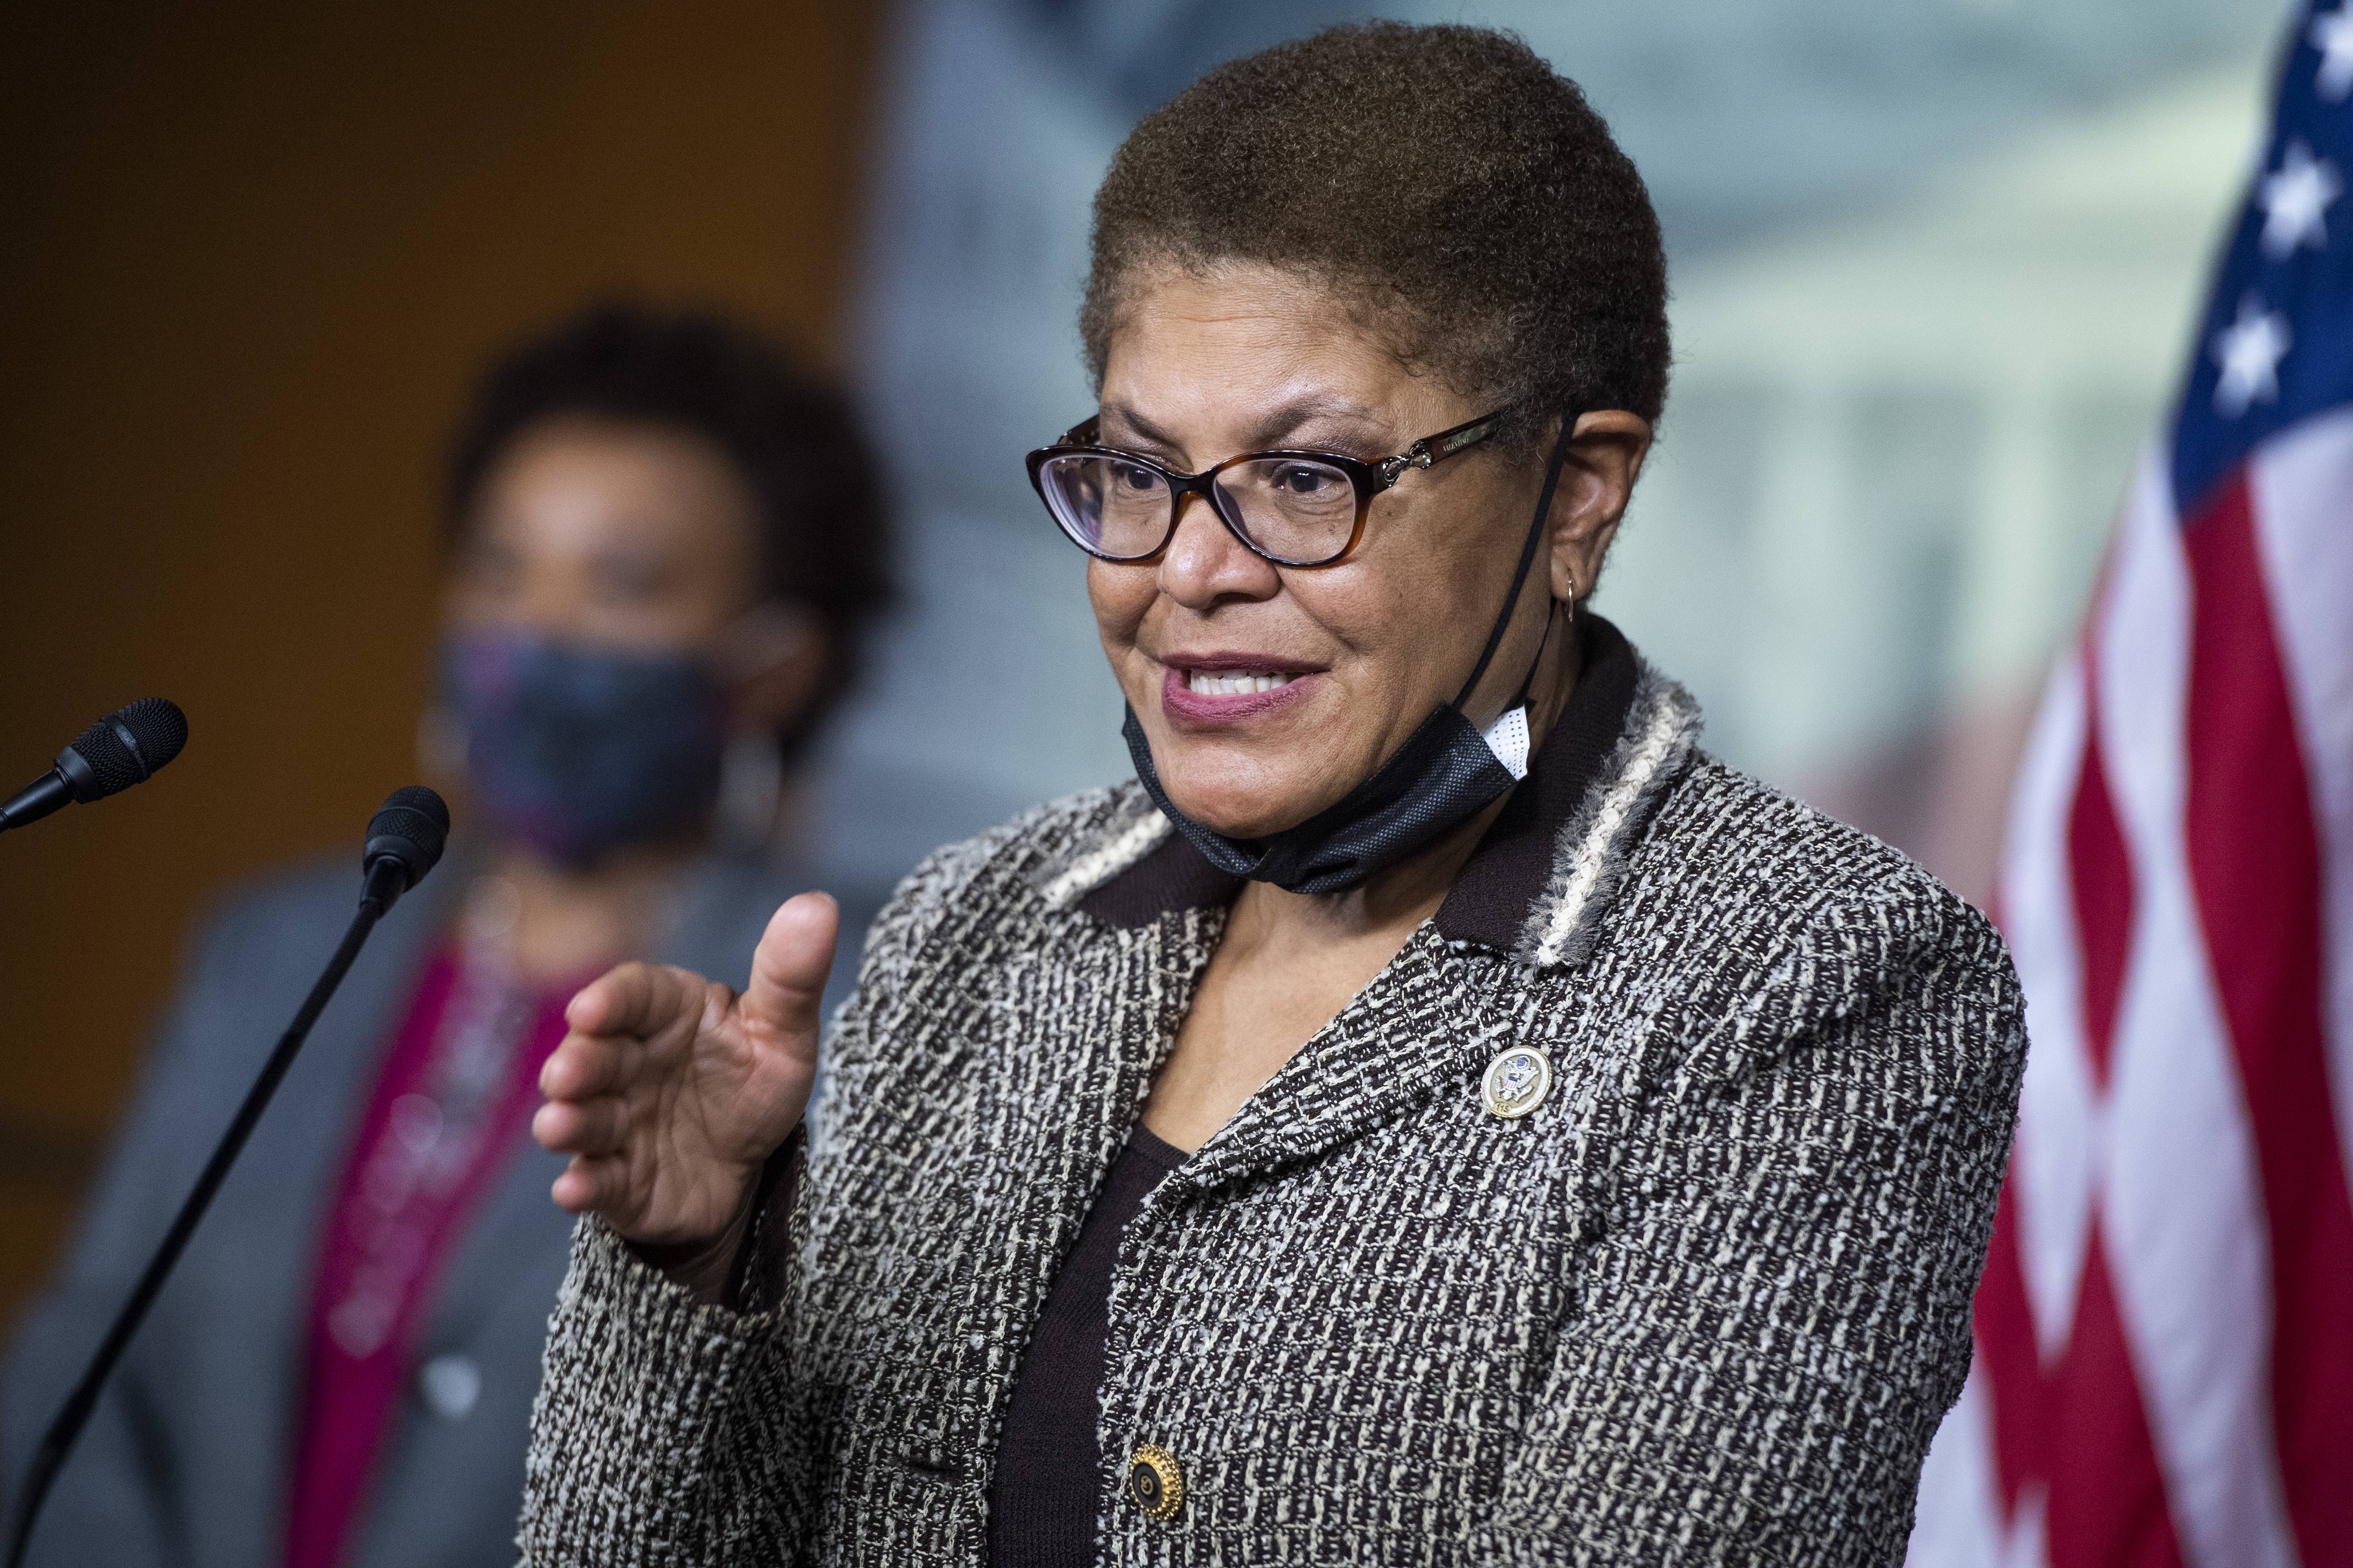 UNITED STATES - SEPTEMBER 23: Rep. Karen Bass, D-Calif., chair of the Congressional Black Caucus, and Rep. Barbara Lee, D-Calif., left, conduct a news conference on the Jobs and Justice Act of 2020, which aims to increase the upward social mobility of Black families, and help ensure equal protection under the law, in the Capitol Visitor Center on Wednesday, September 23, 2020. (Photo By Tom Williams/CQ-Roll Call, Inc via Getty Images)